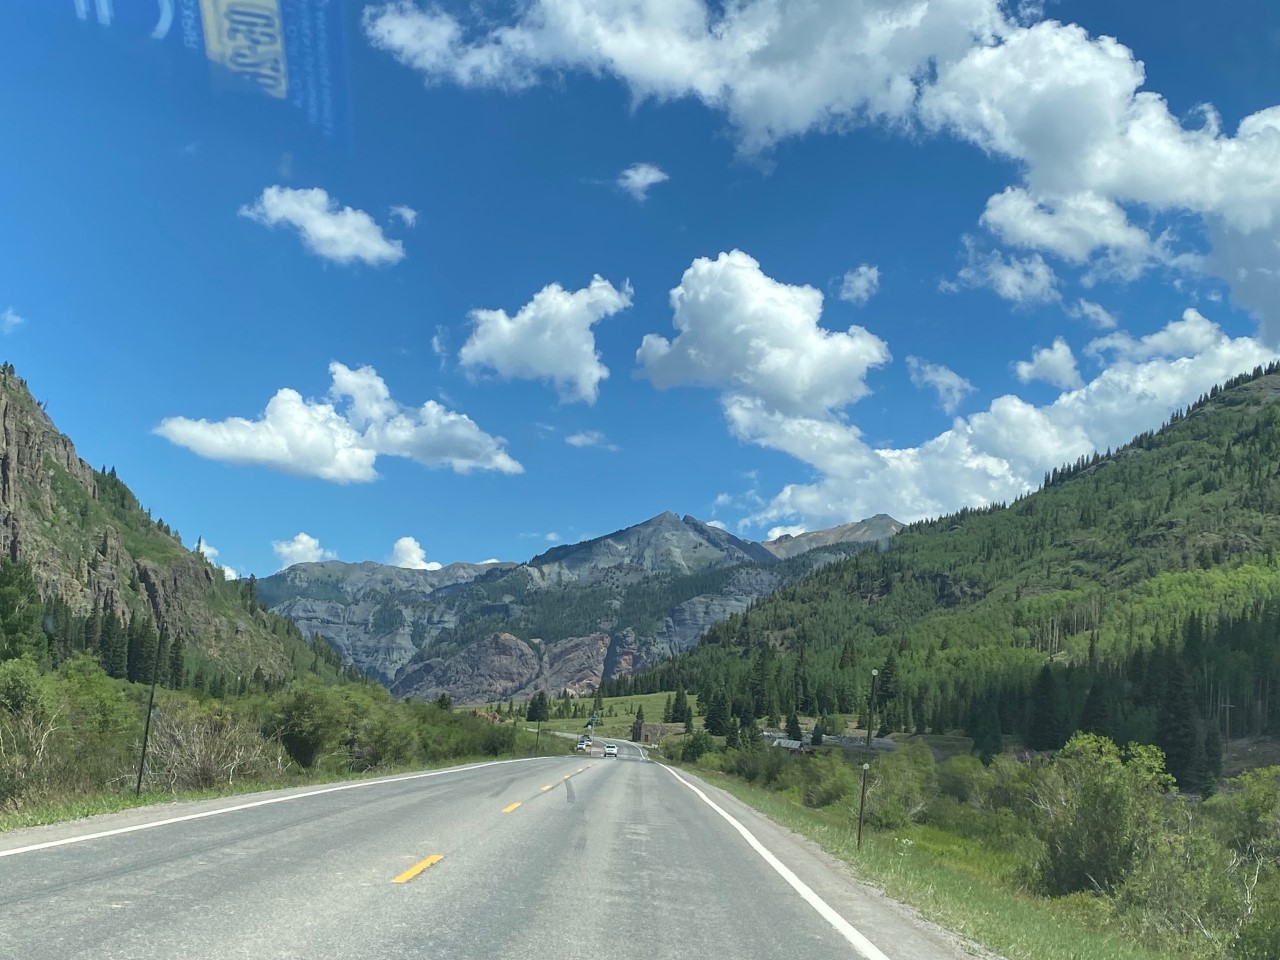 The scenery changes to more rocky mountain terrain.